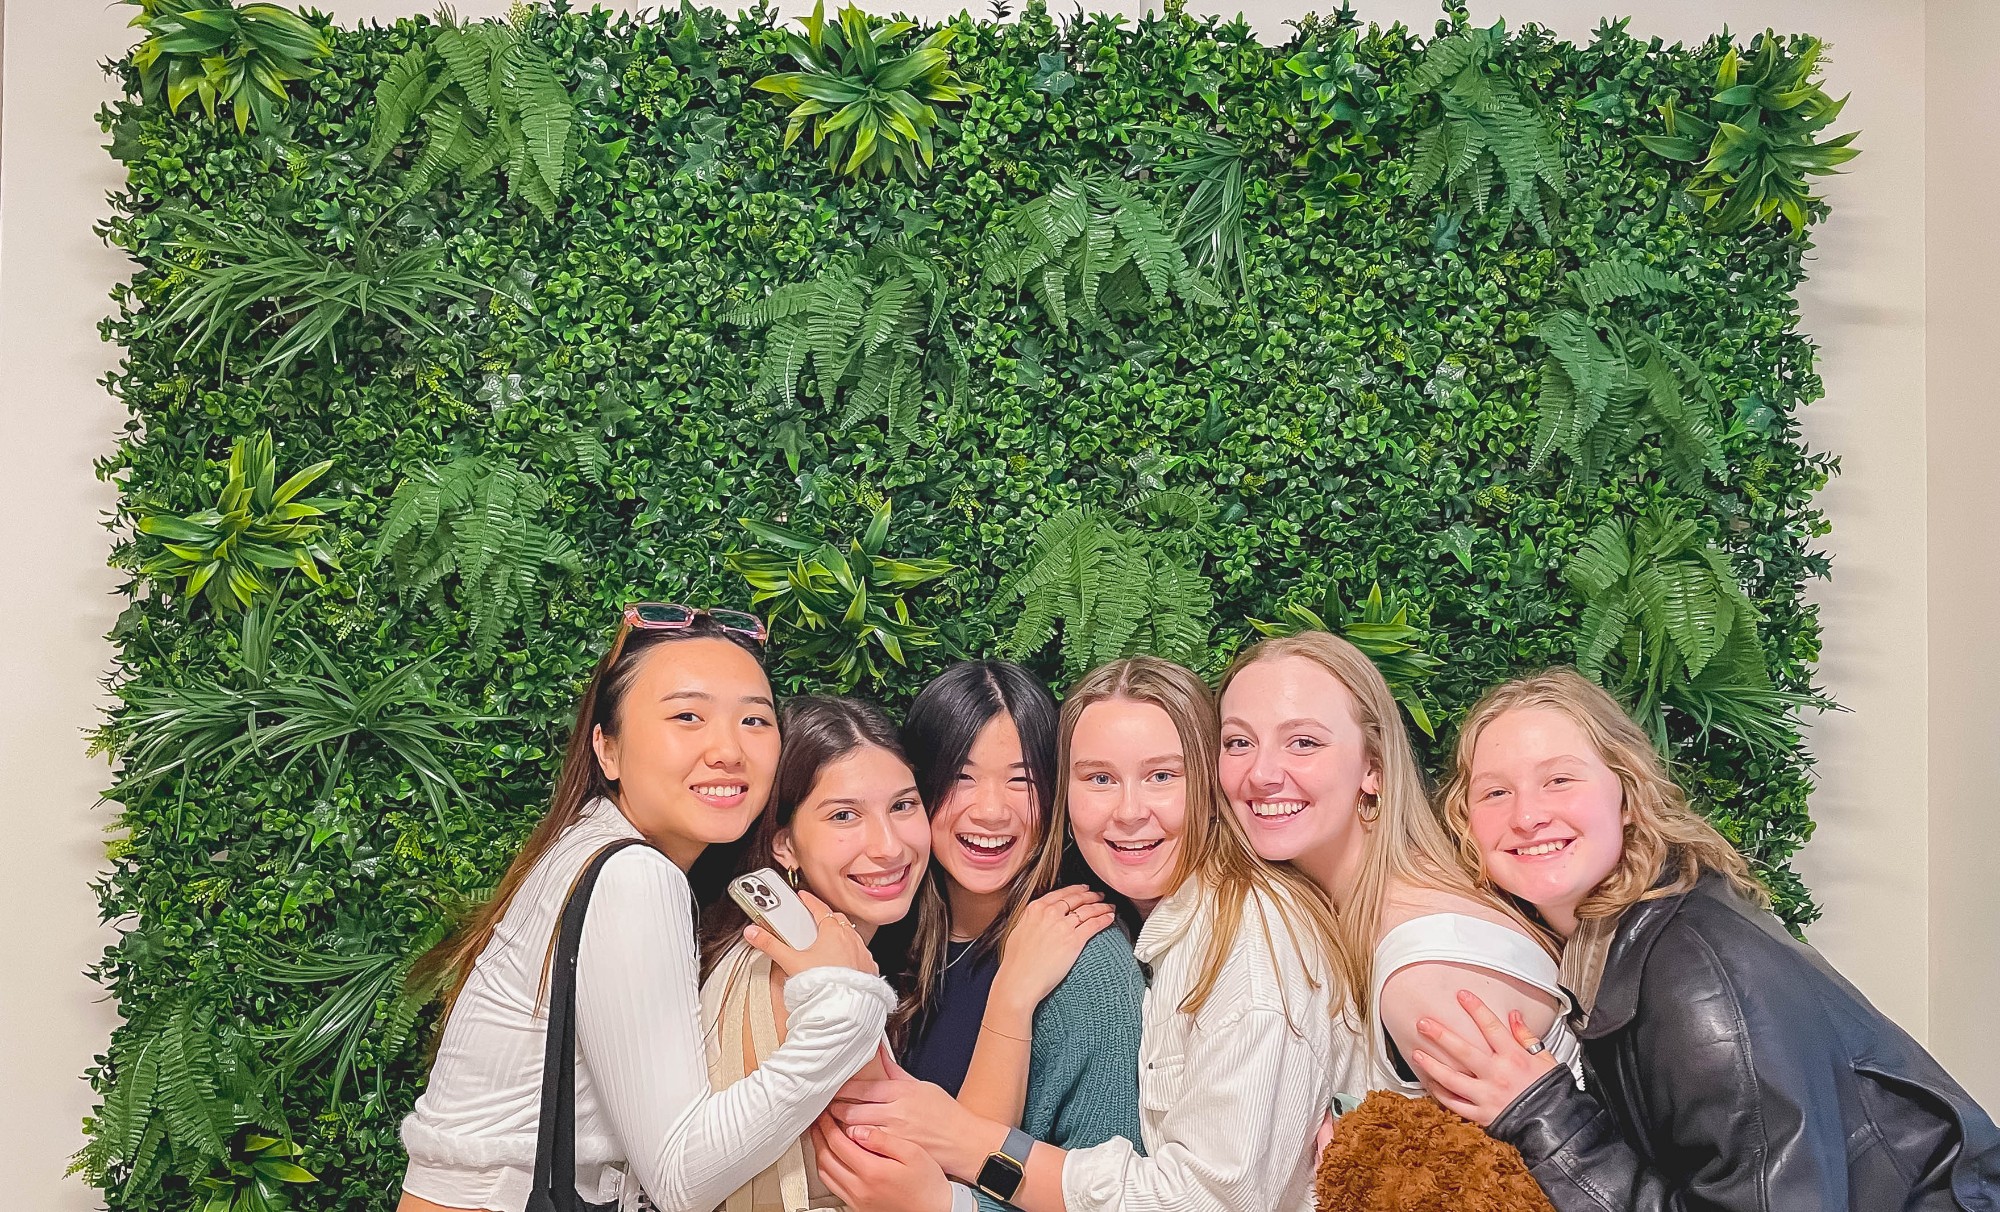 A group of female undergraduate students hanging out at a restaurant standing in front of a green leafy decor